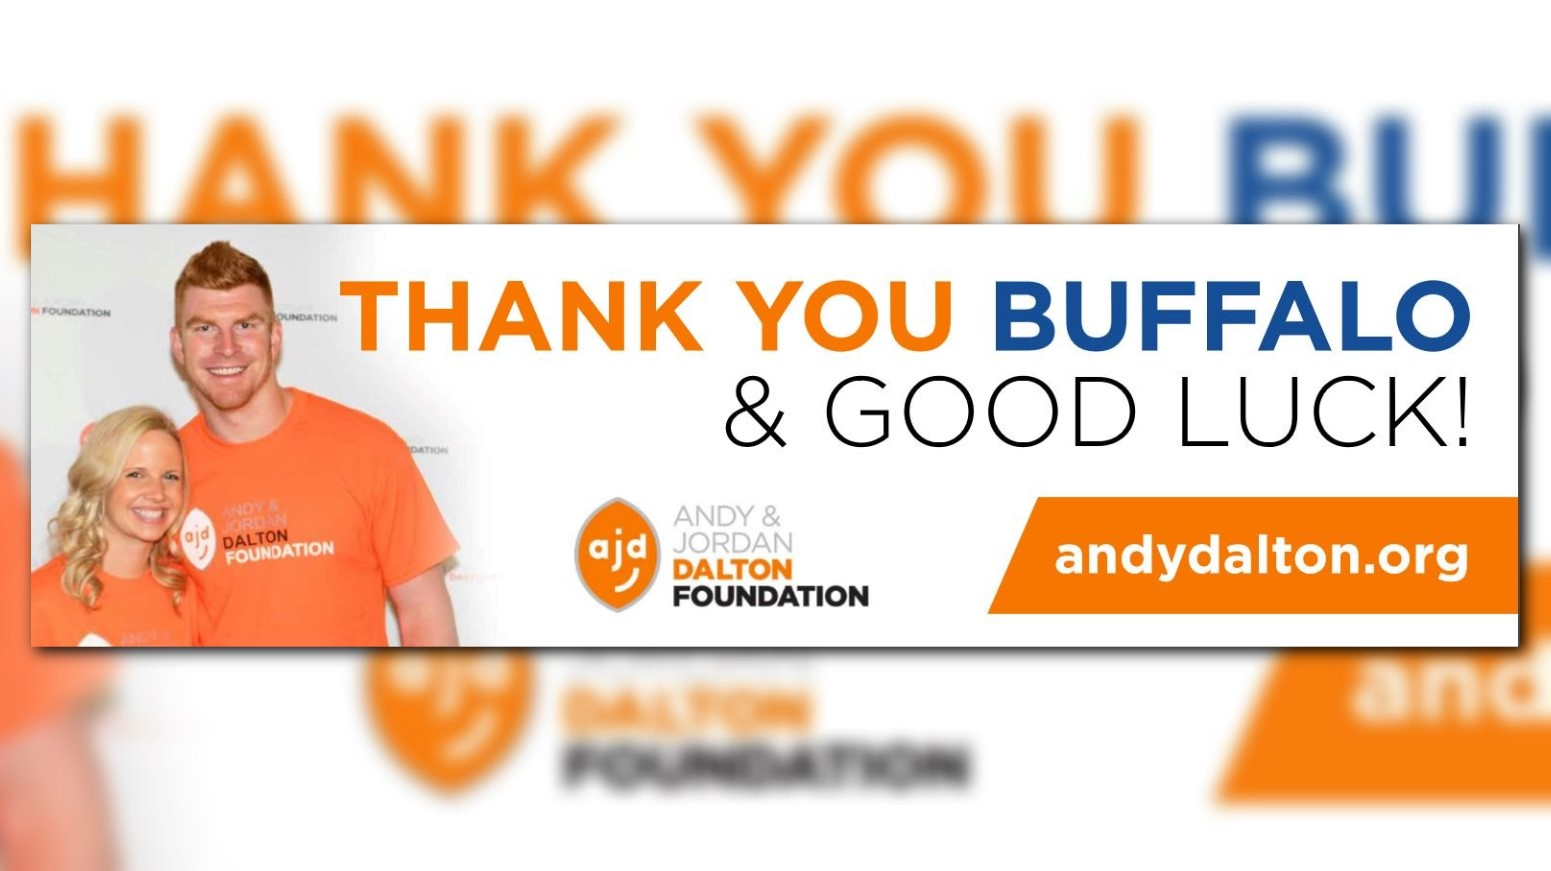 Spotlight on the Positive: Aaron Rodgers, the Packers Organization &amp; Bills fans donating over $300,000 to Andy Dalton's Foundation